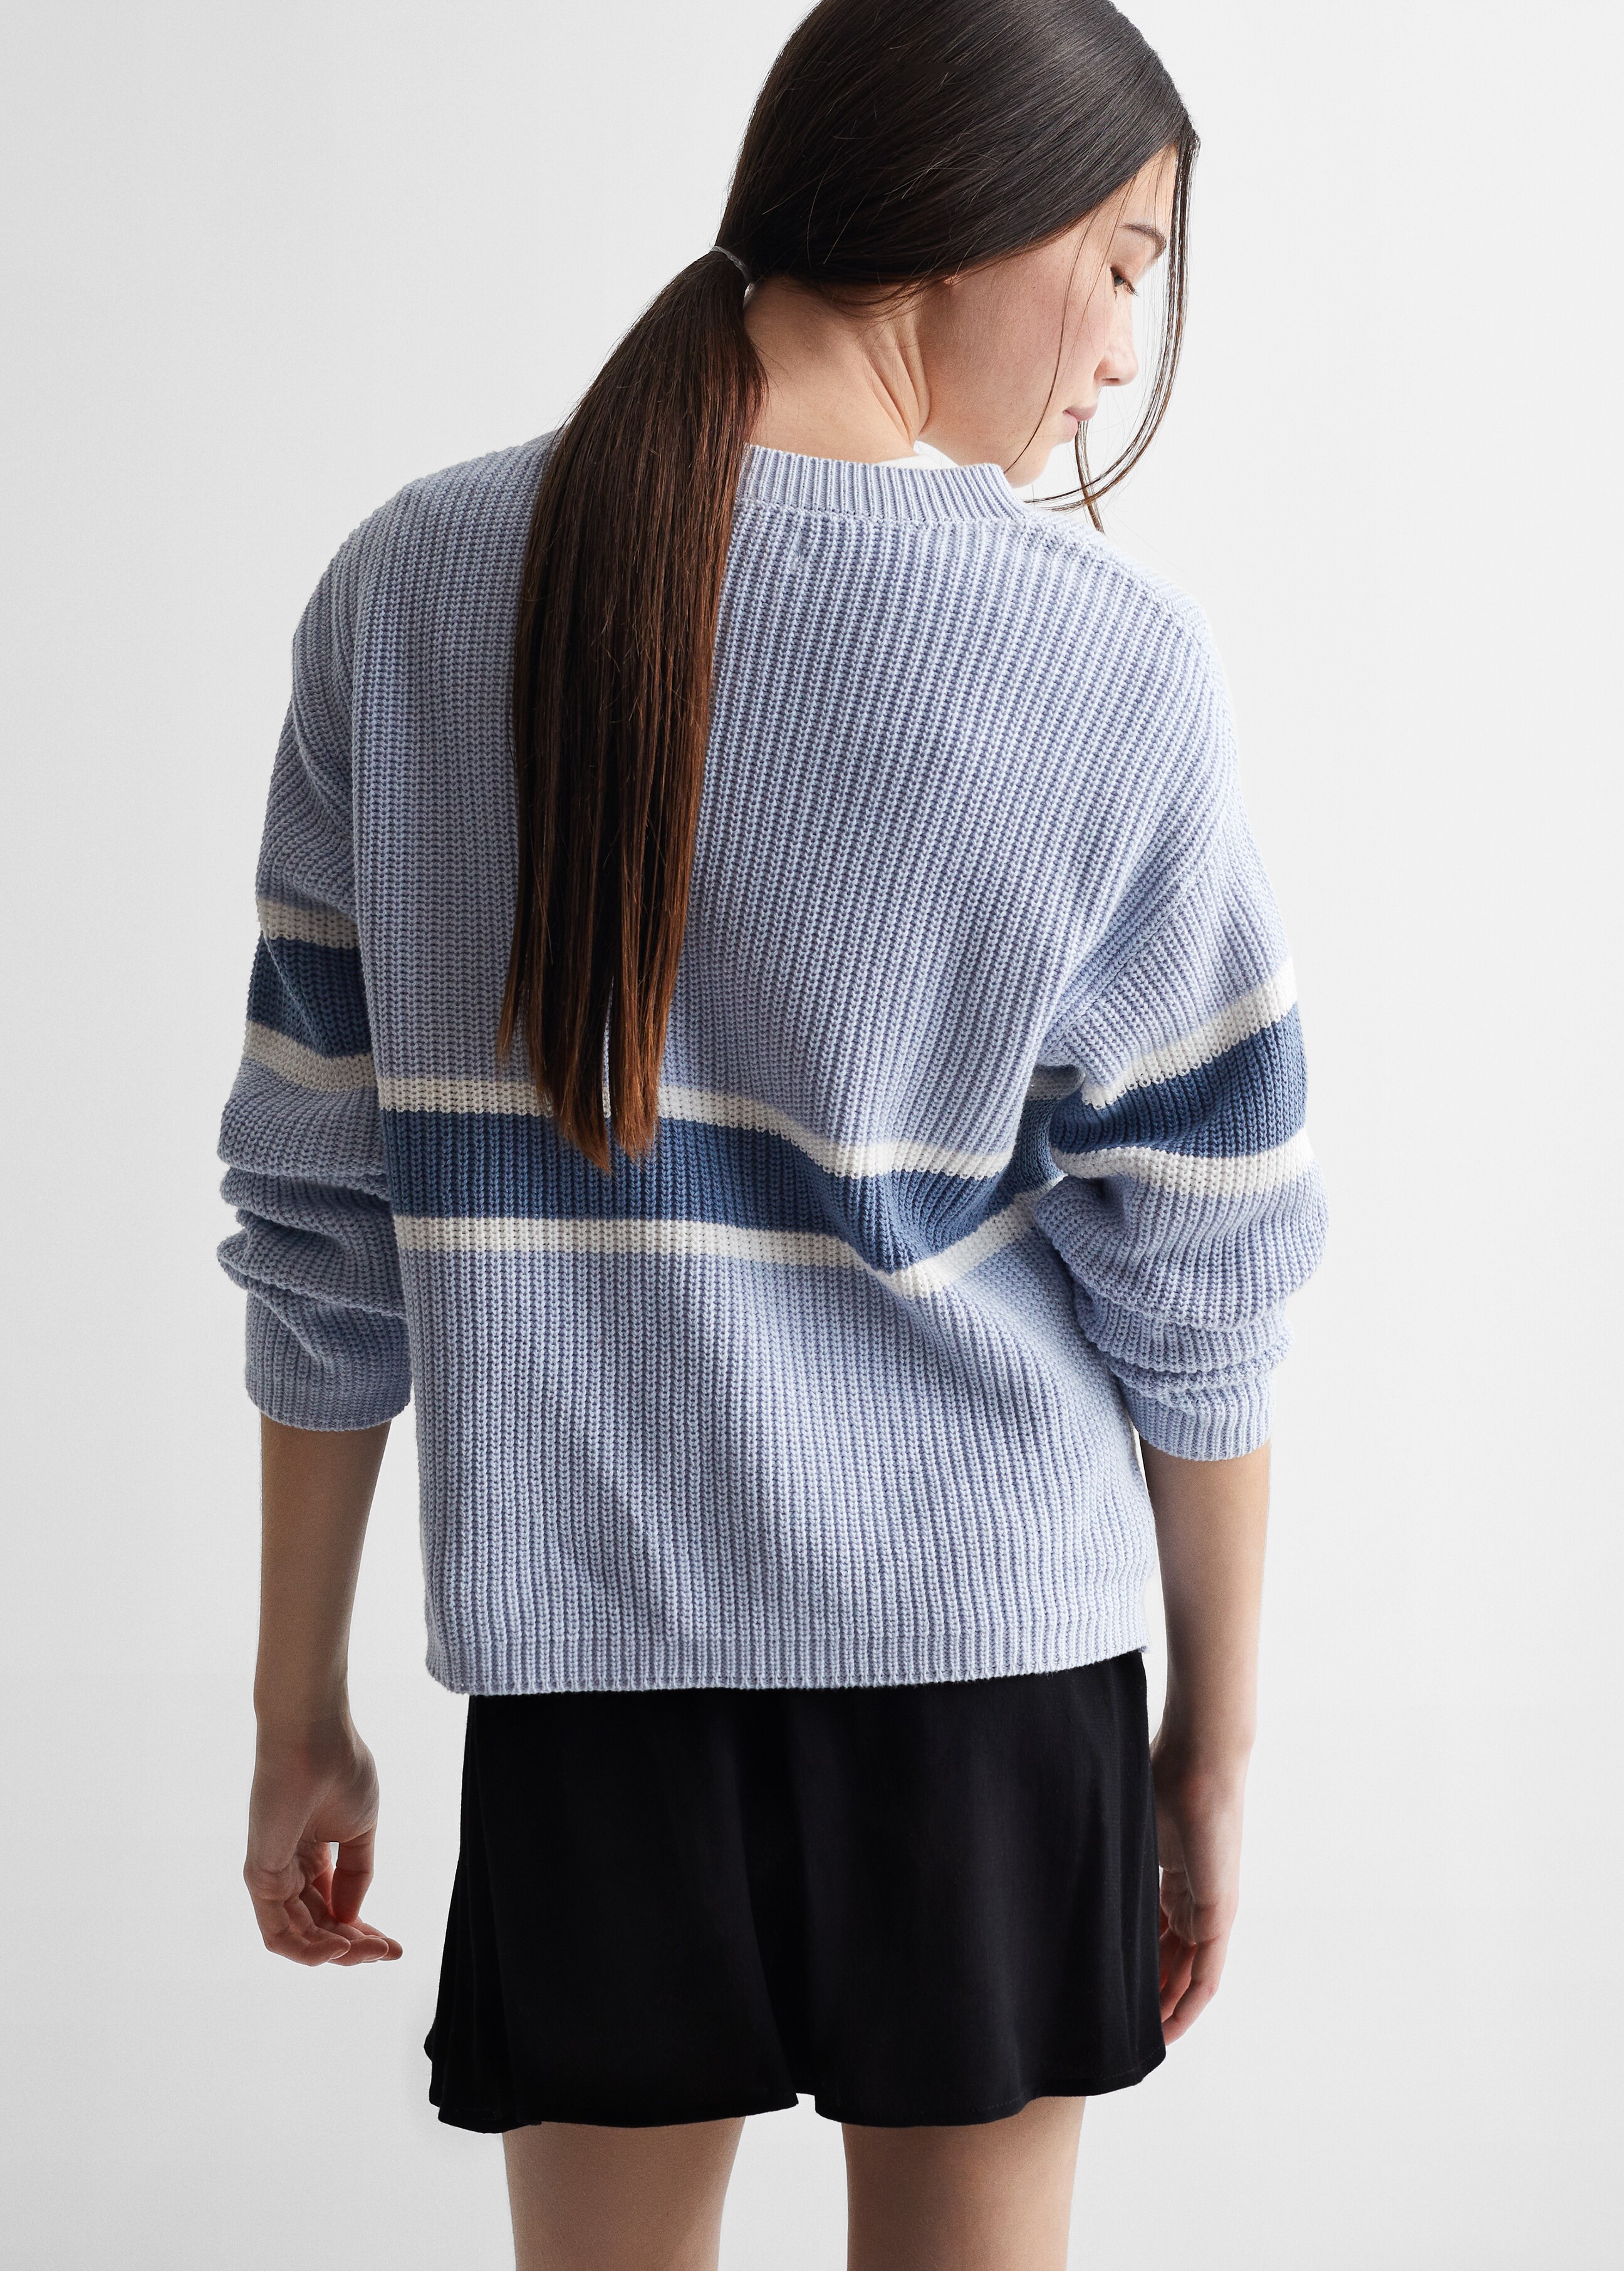 Knit cotton sweater - Reverse of the article